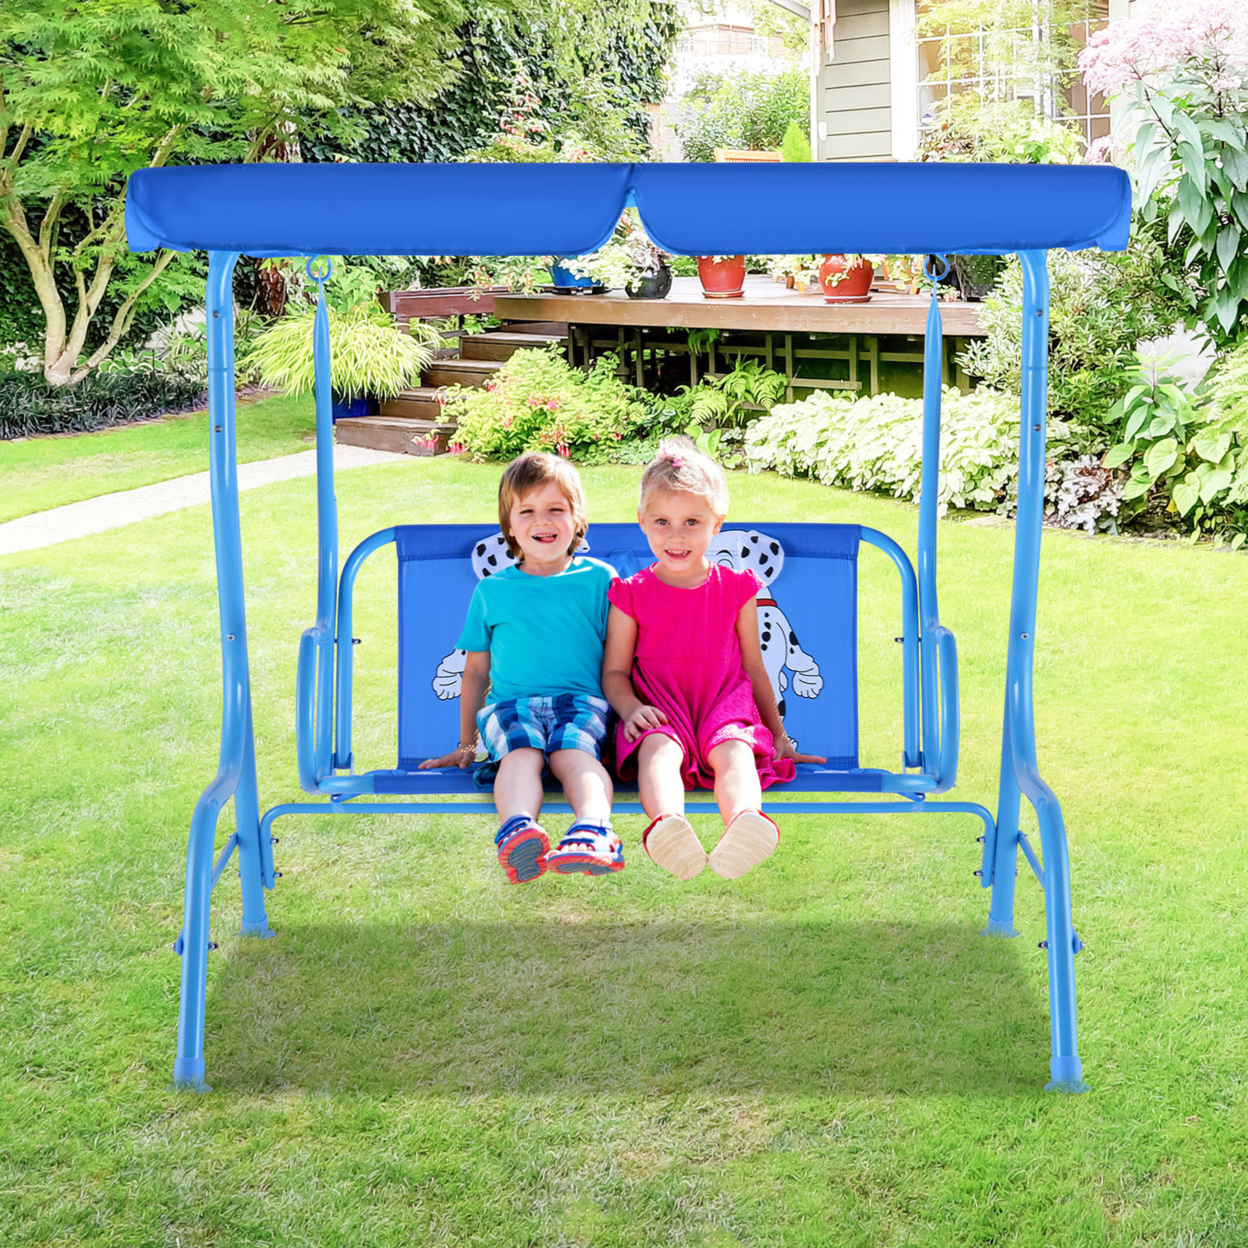 Kids Patio Porch Bench Swing W/ Safety Belt Canopy Outdoor Furniture Blue